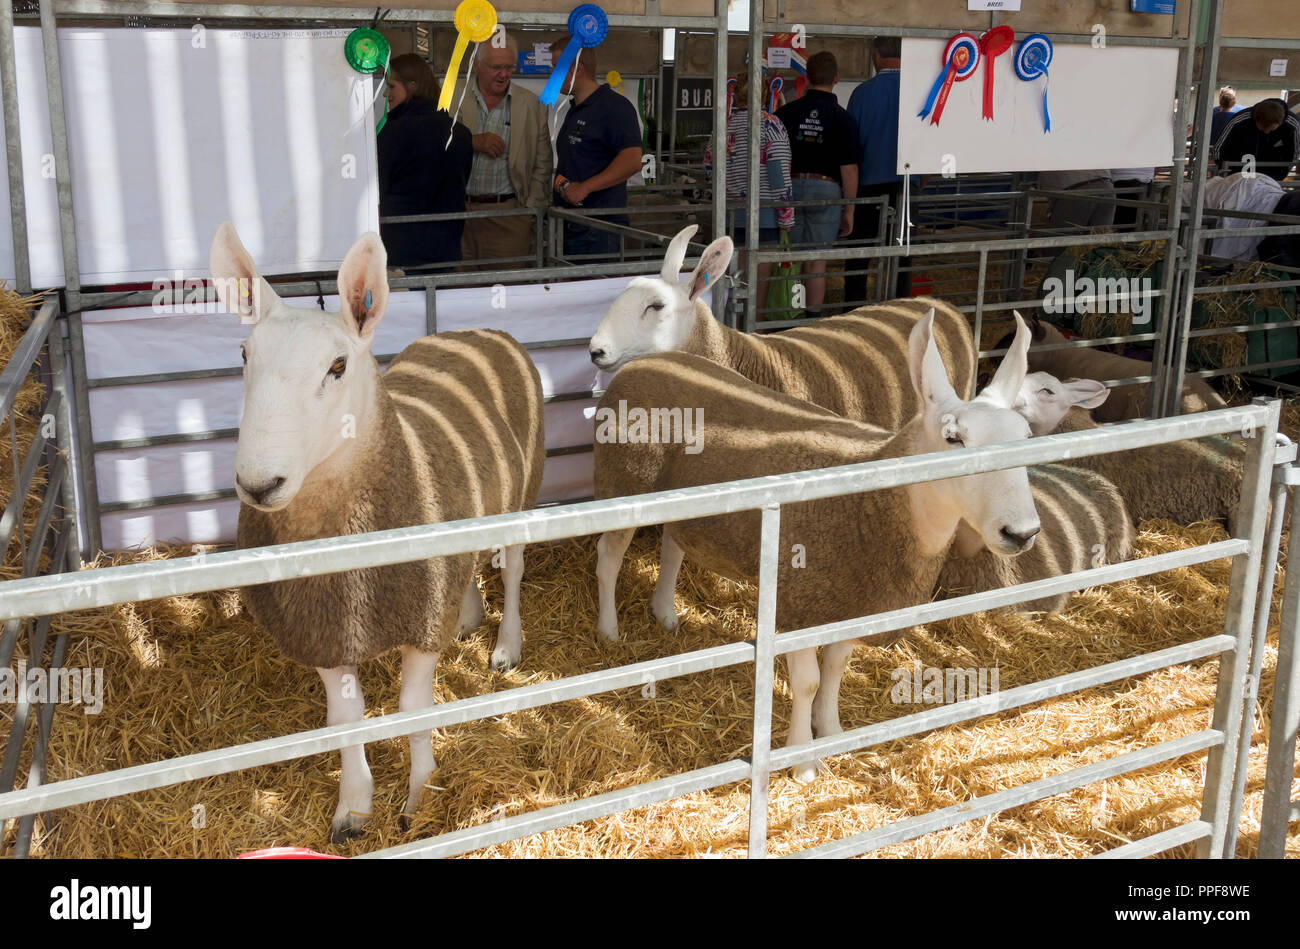 Close up of Border Leicester sheep in a pen at Great Yorkshire Show in summer Harrogate North Yorkshire England UK United Kingdom GB Great Britain Stock Photo